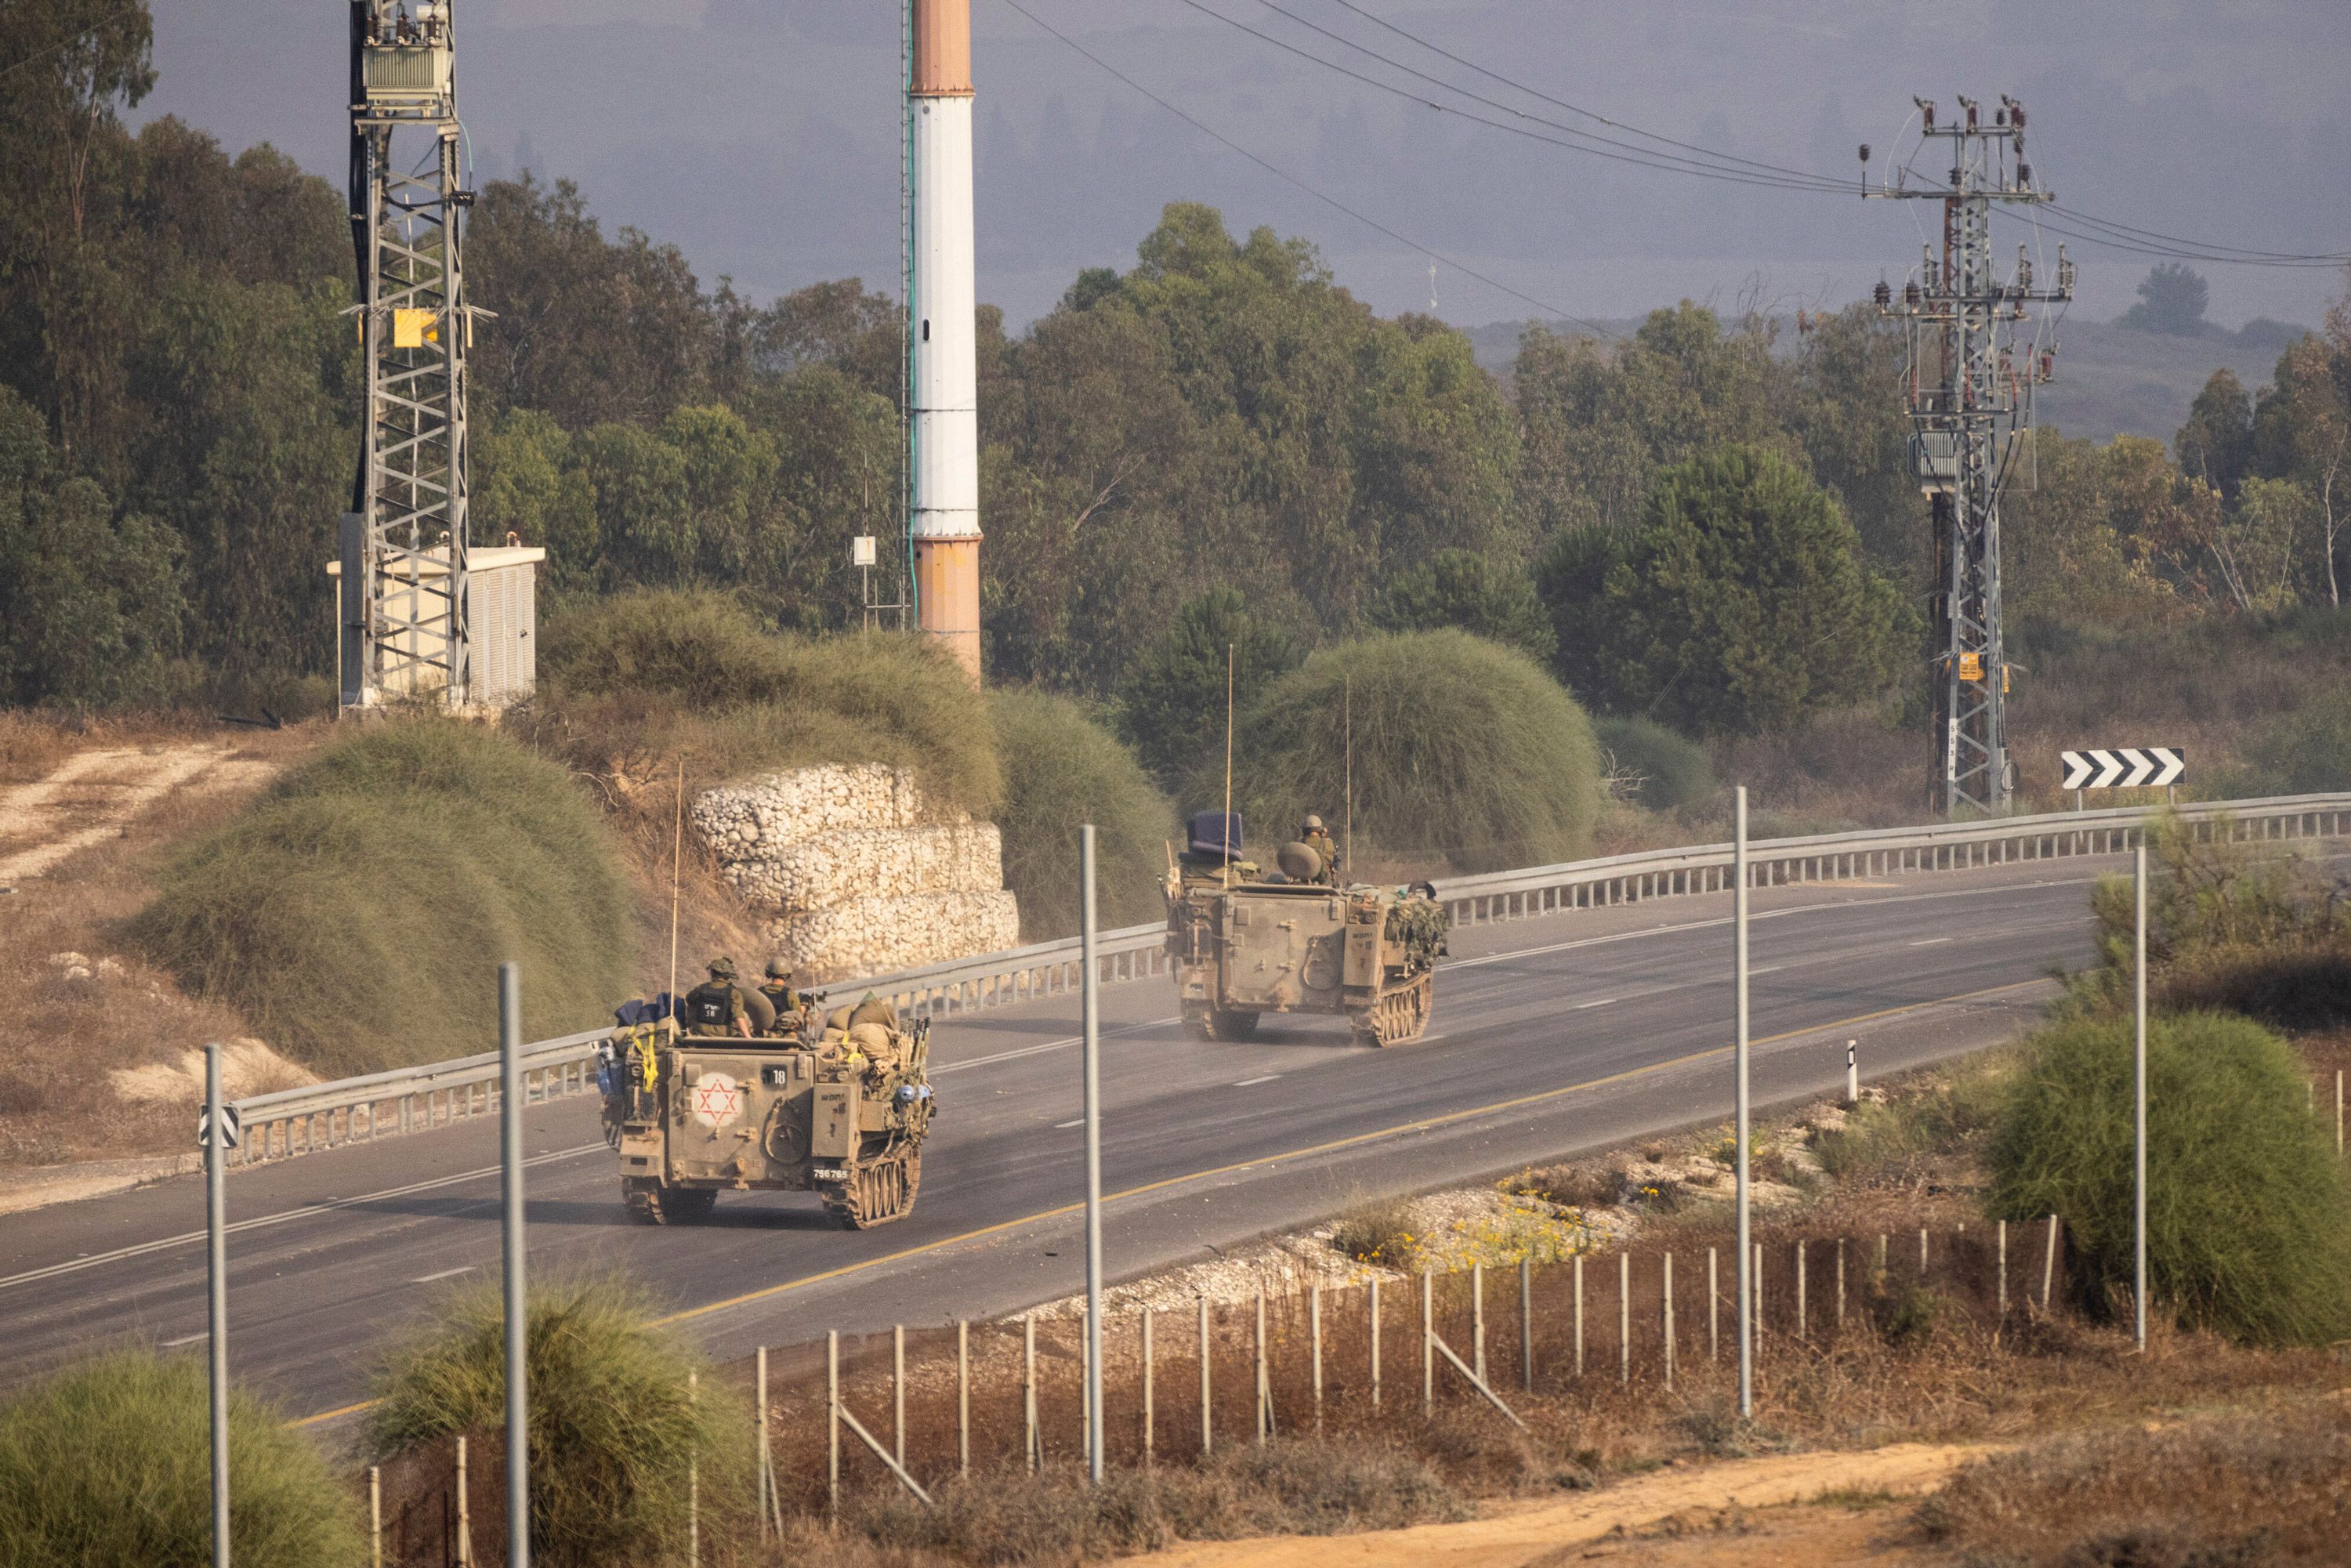 Israeli armored vehicles on the move near the border with Gaza, in Sderot, Israel on the morning of October 28.